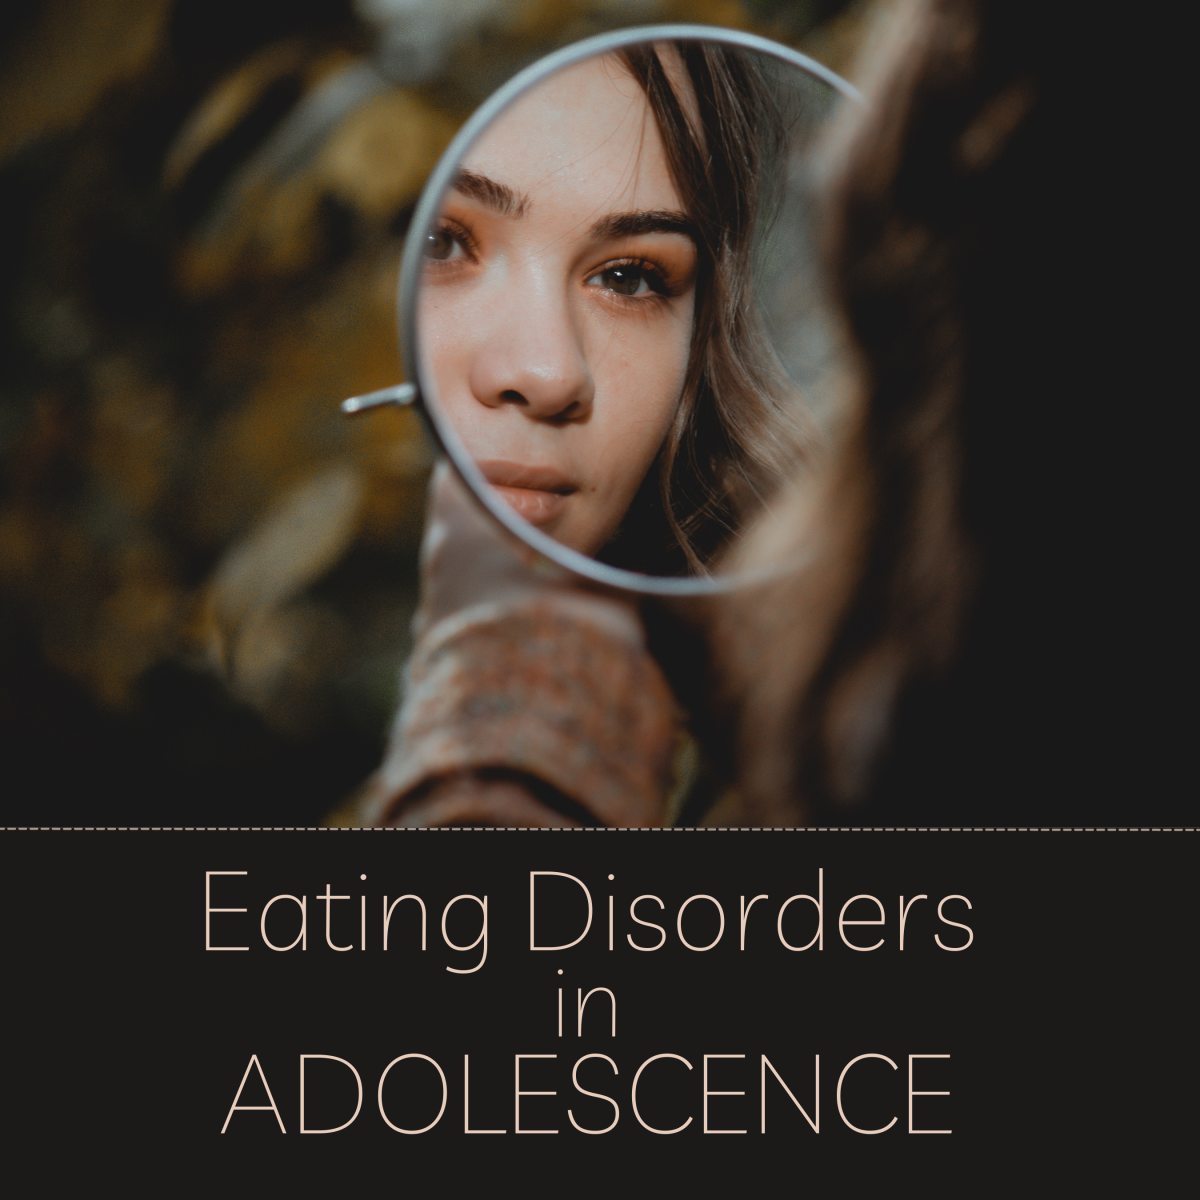 3 Factors That Affect Eating Disorders in Adolescence